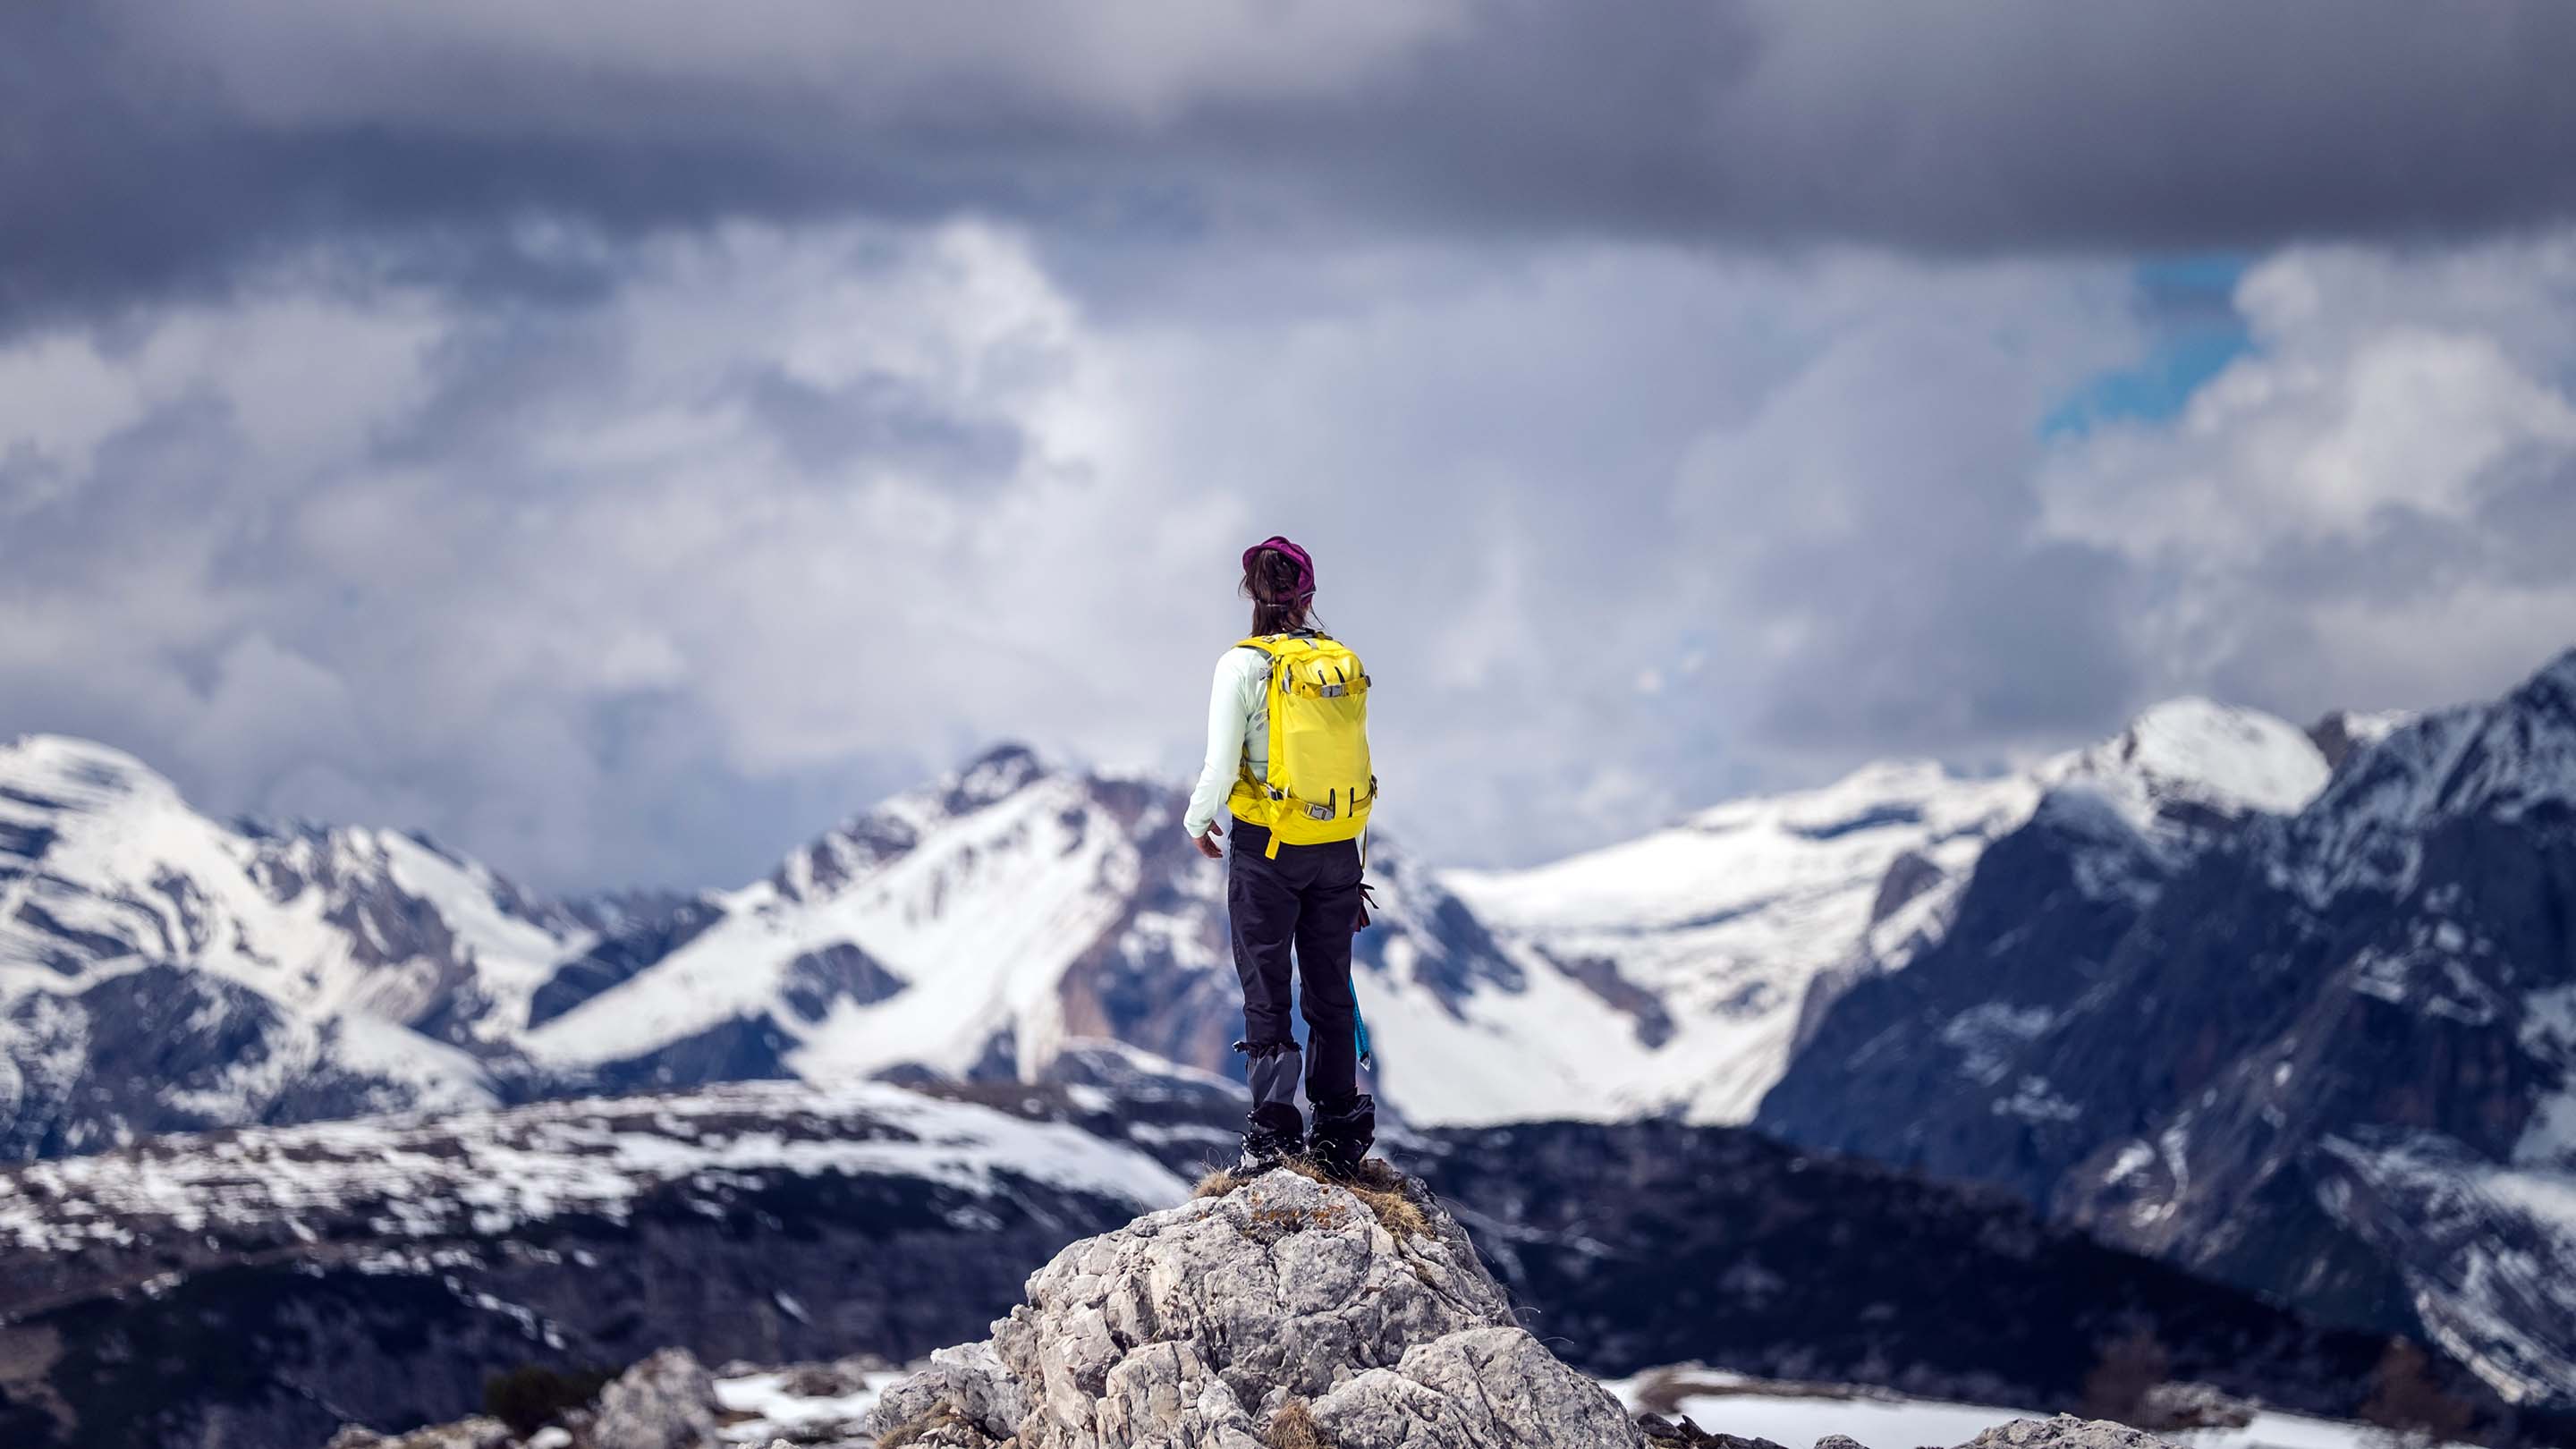 Tourist standing on a stone in the snowy mountains